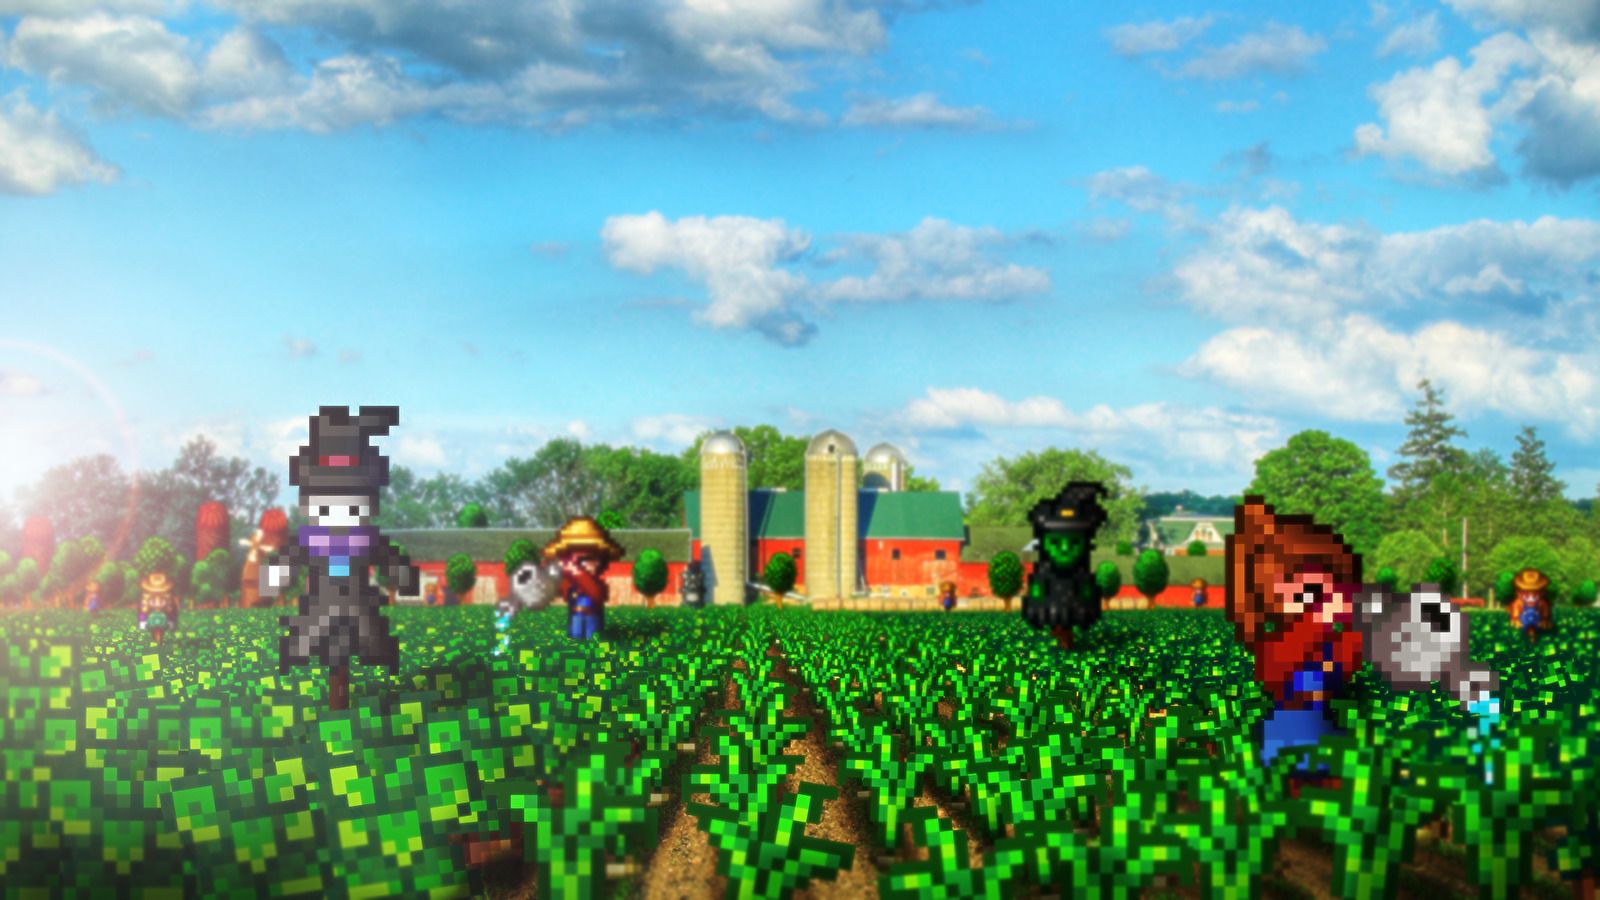 Stardew Valley HD Wallpaper that I made